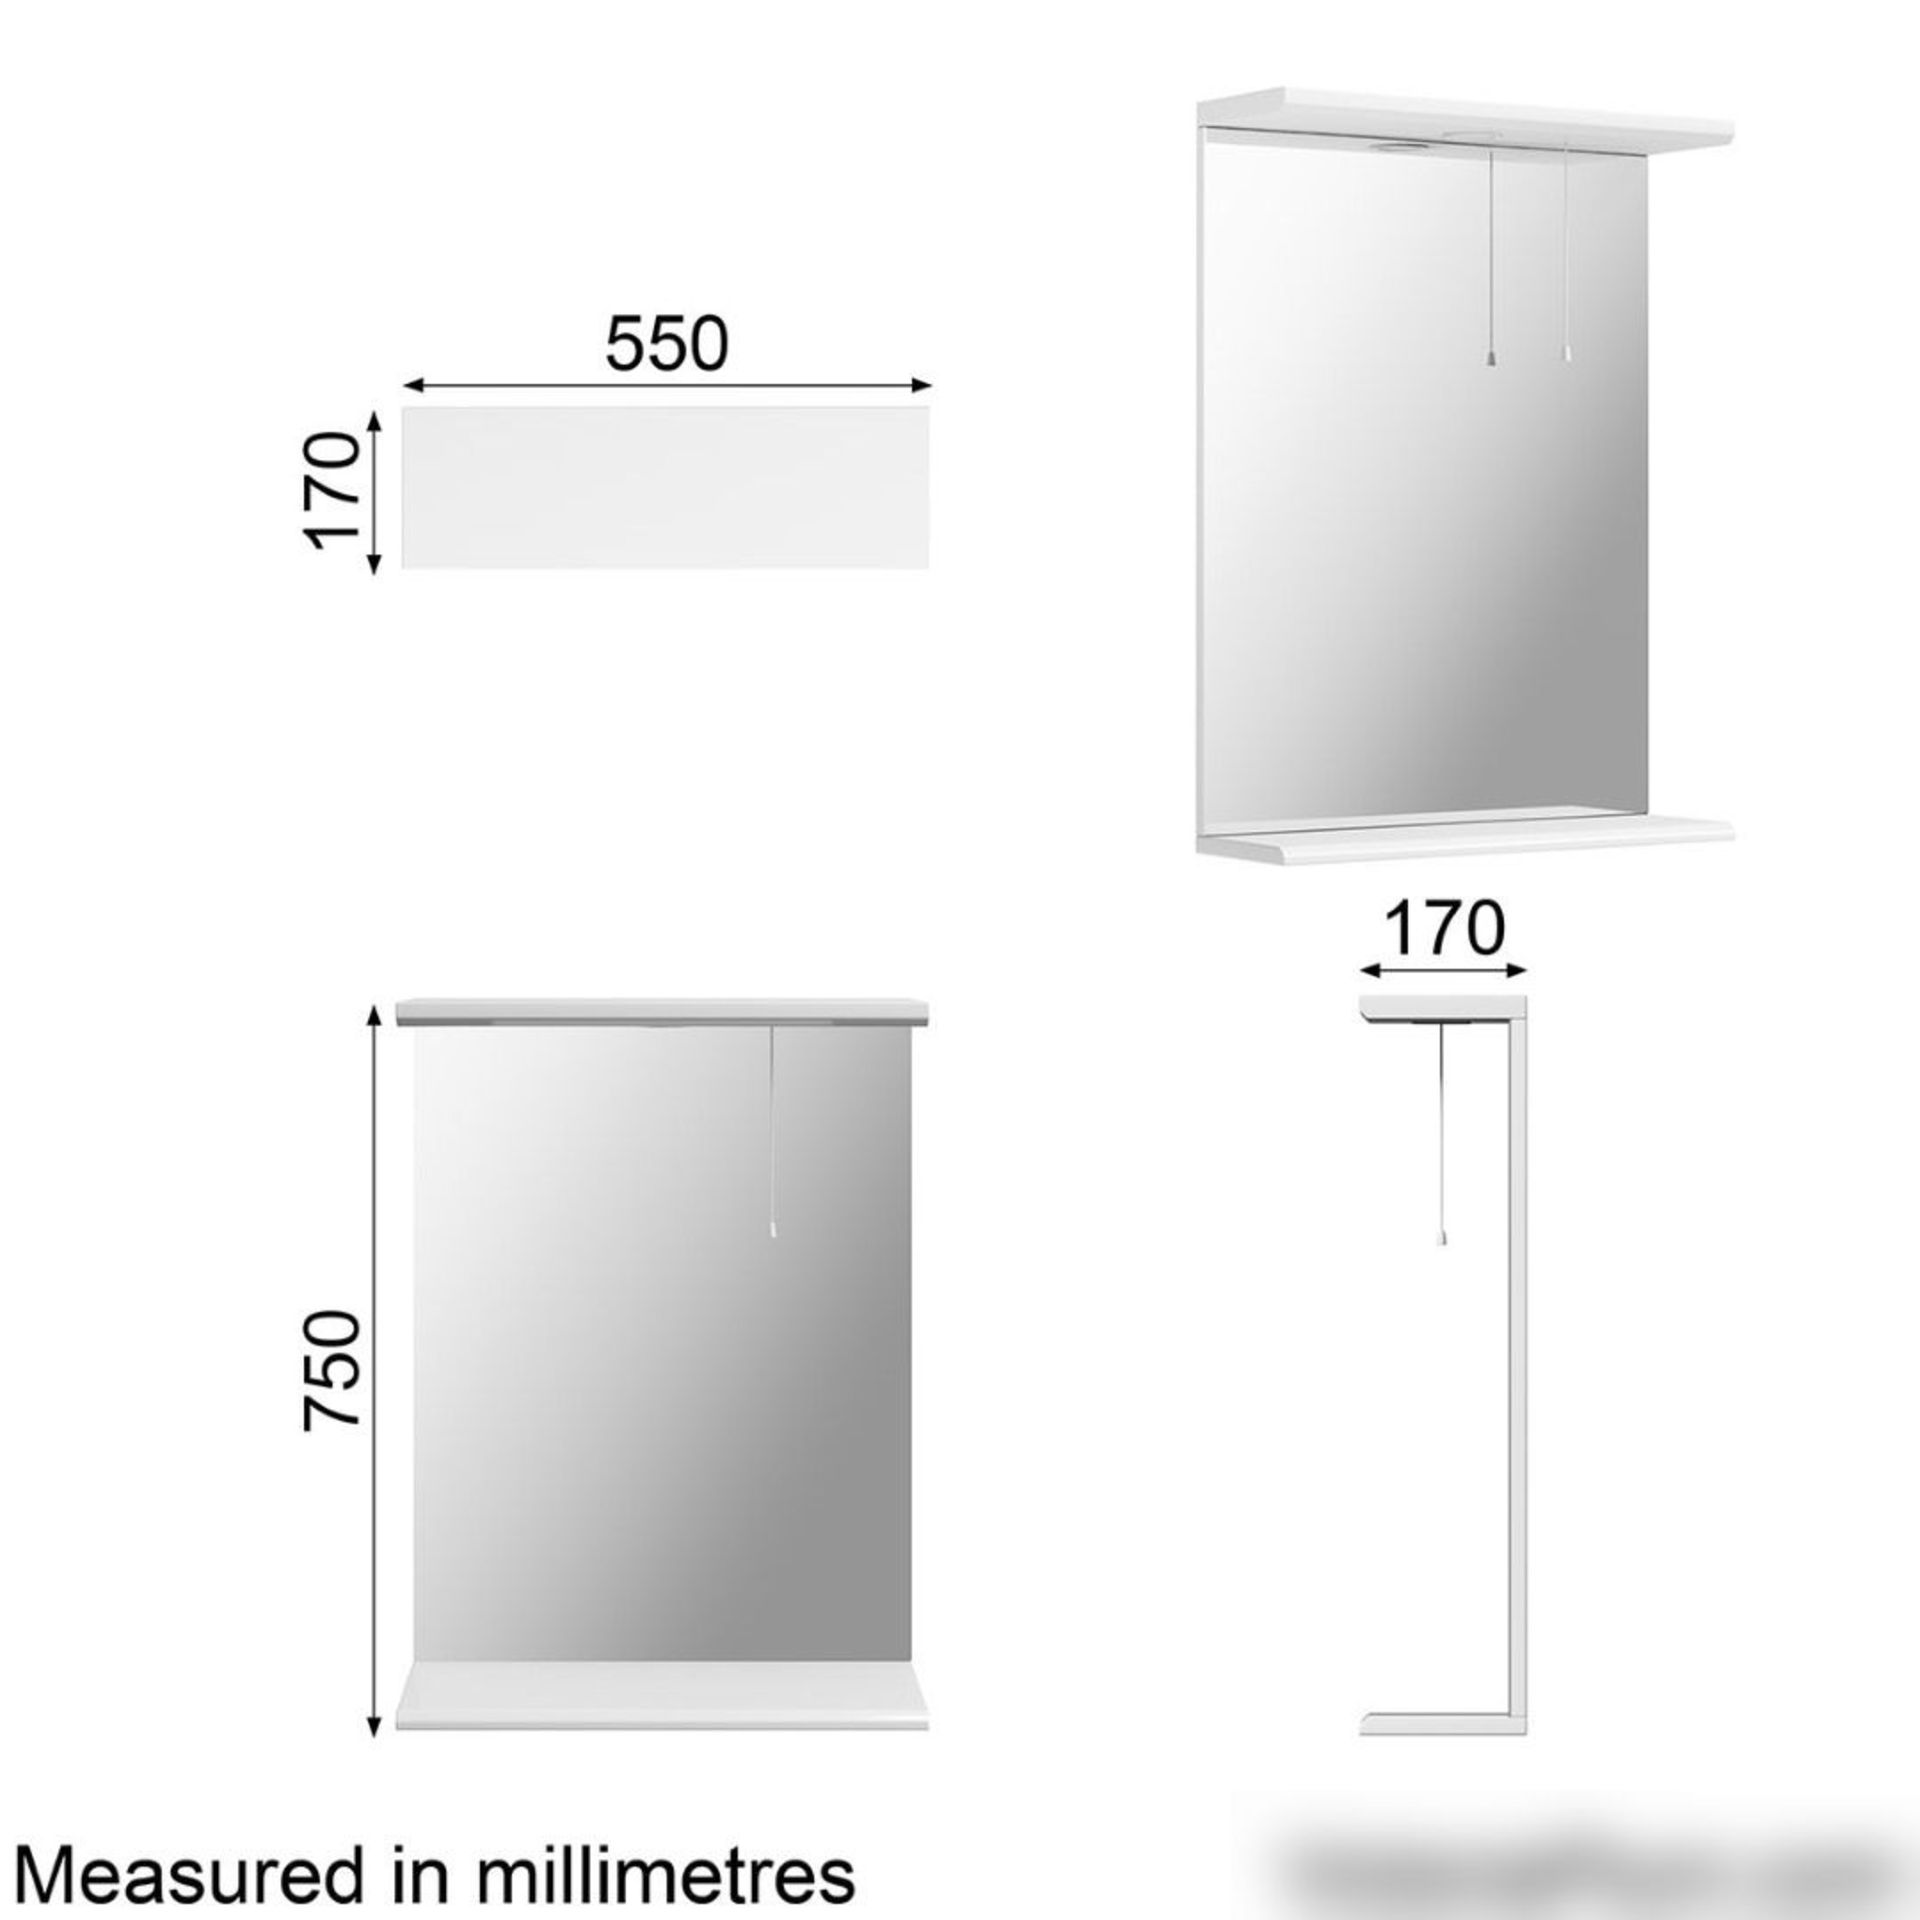 1 x Sienna White 550 Bathroom Mirror With Lights - Ref: DY157/LMW5501 - CL190 - Unused Stock - Locat - Image 8 of 8